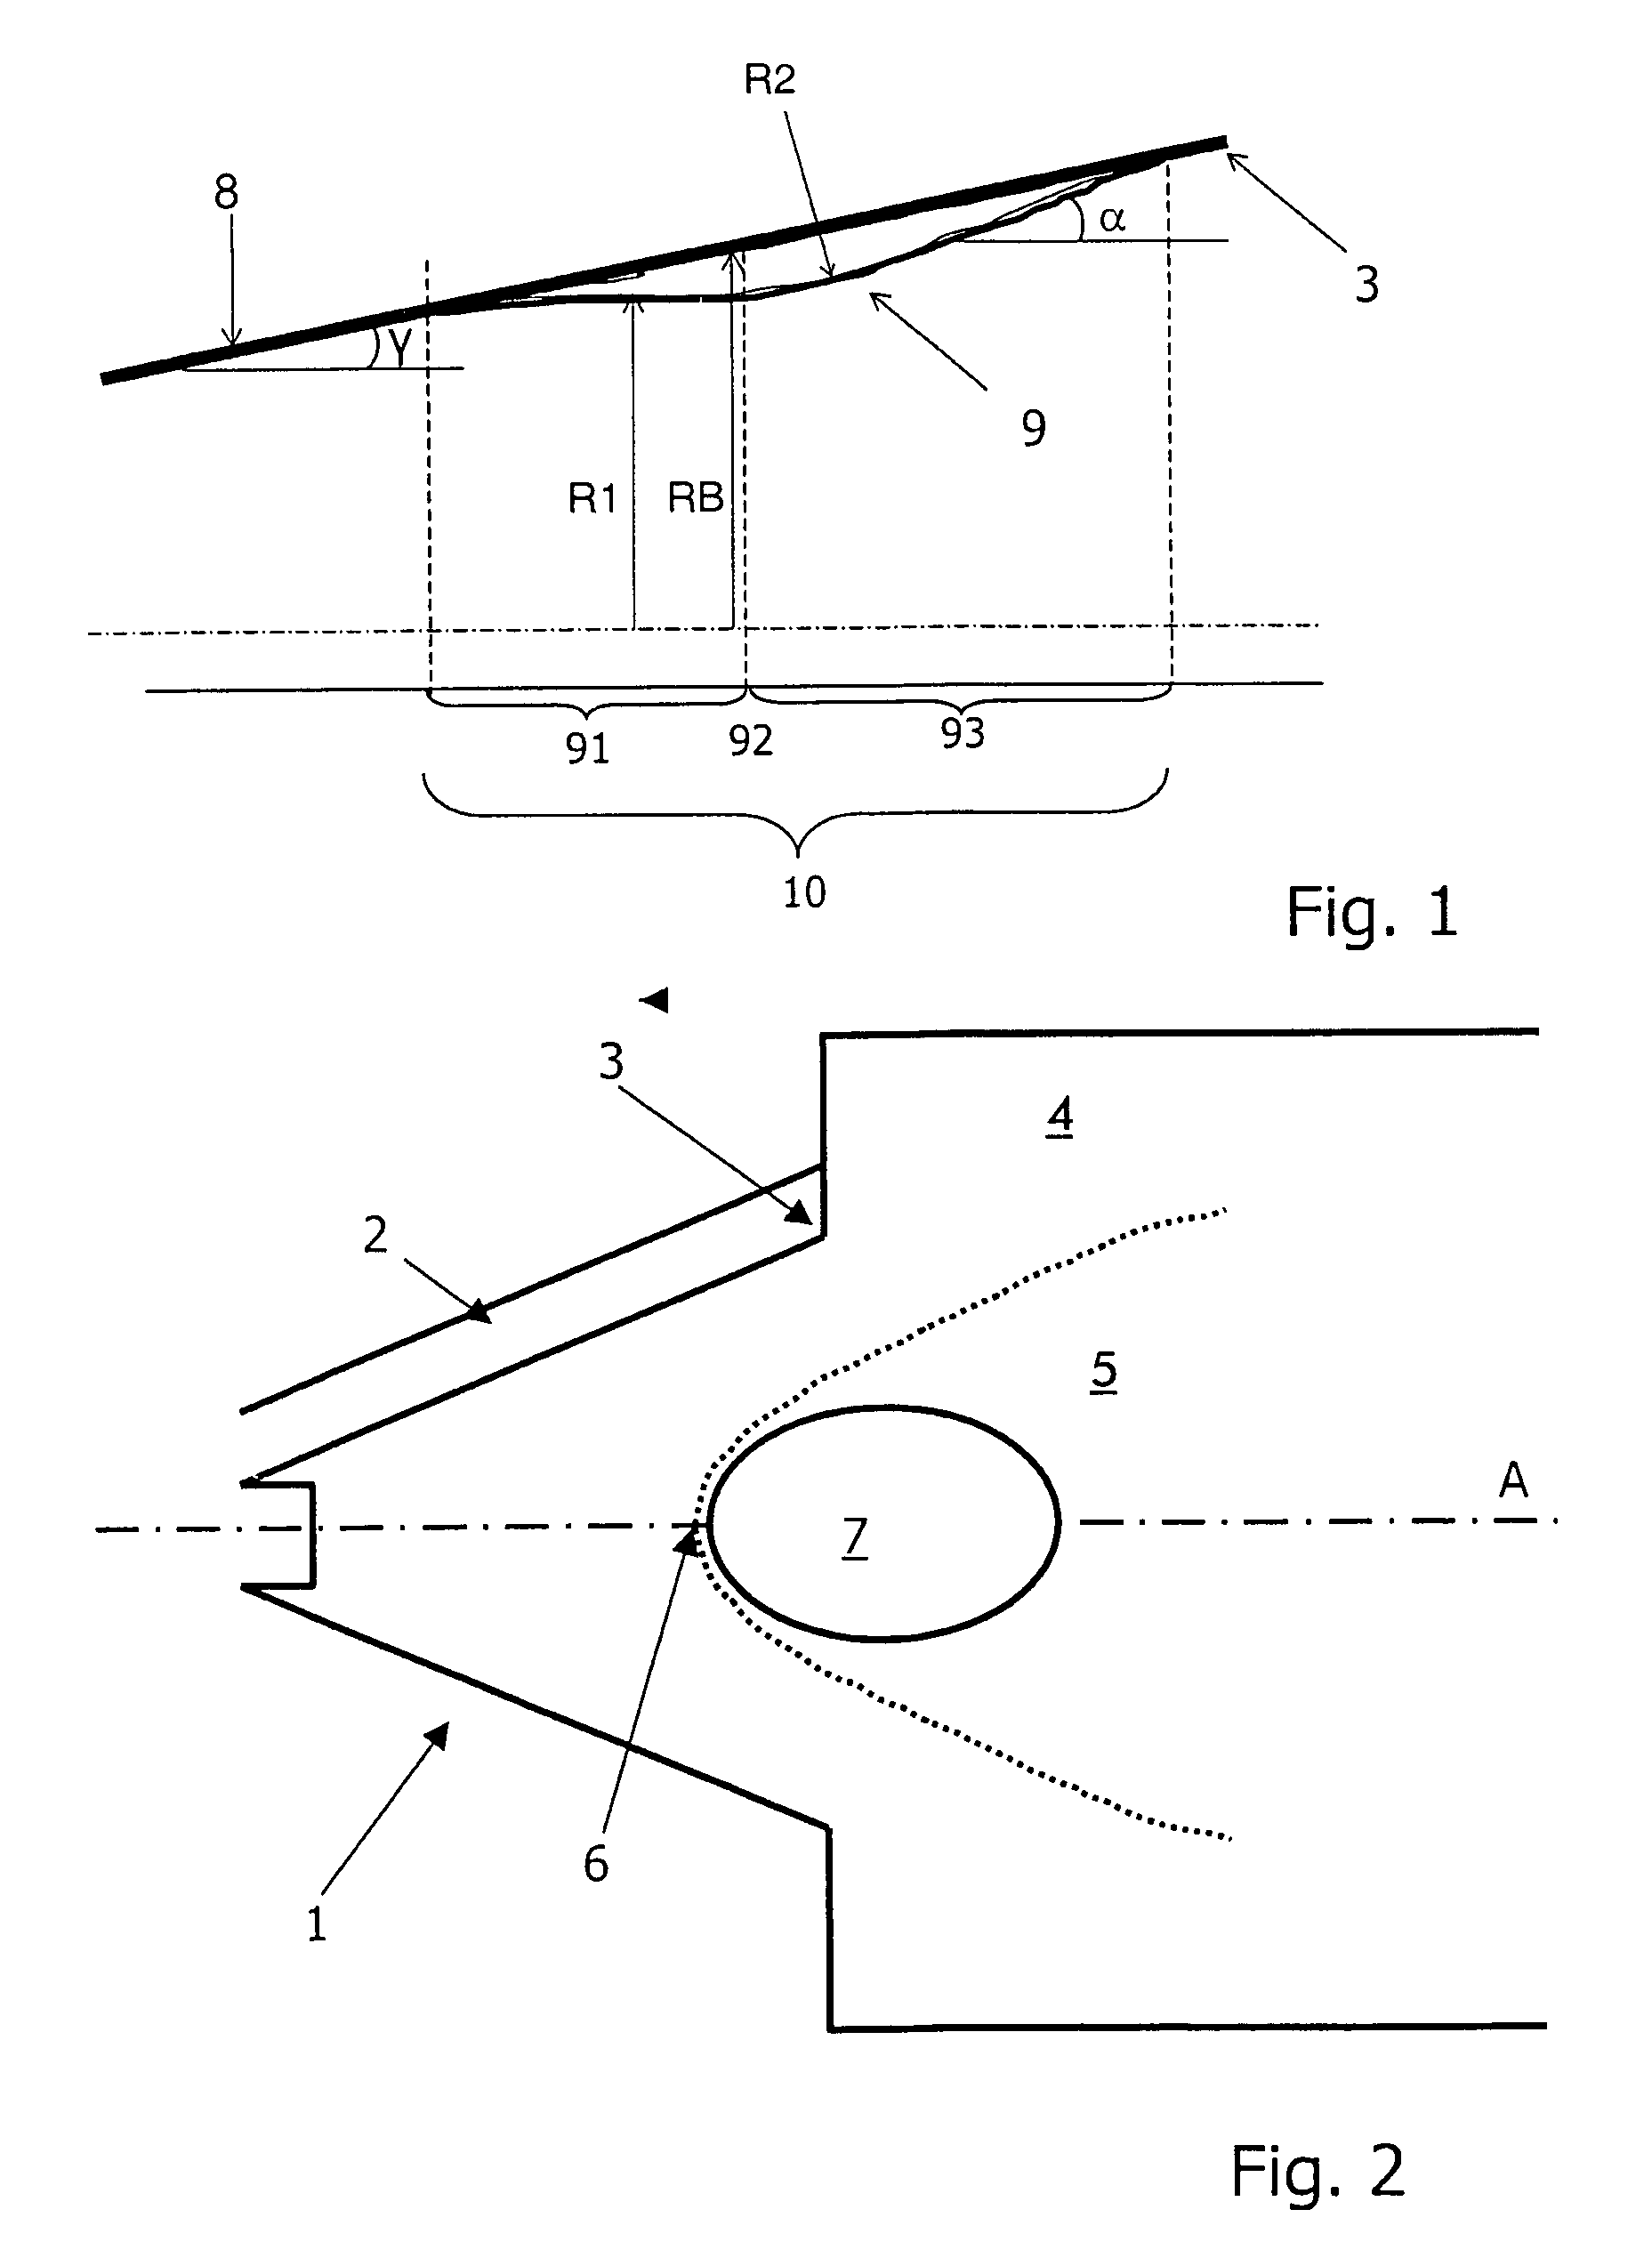 Premixing burner arrangement for operating a combustion chamber in addition to a method for operating a combustion chamber